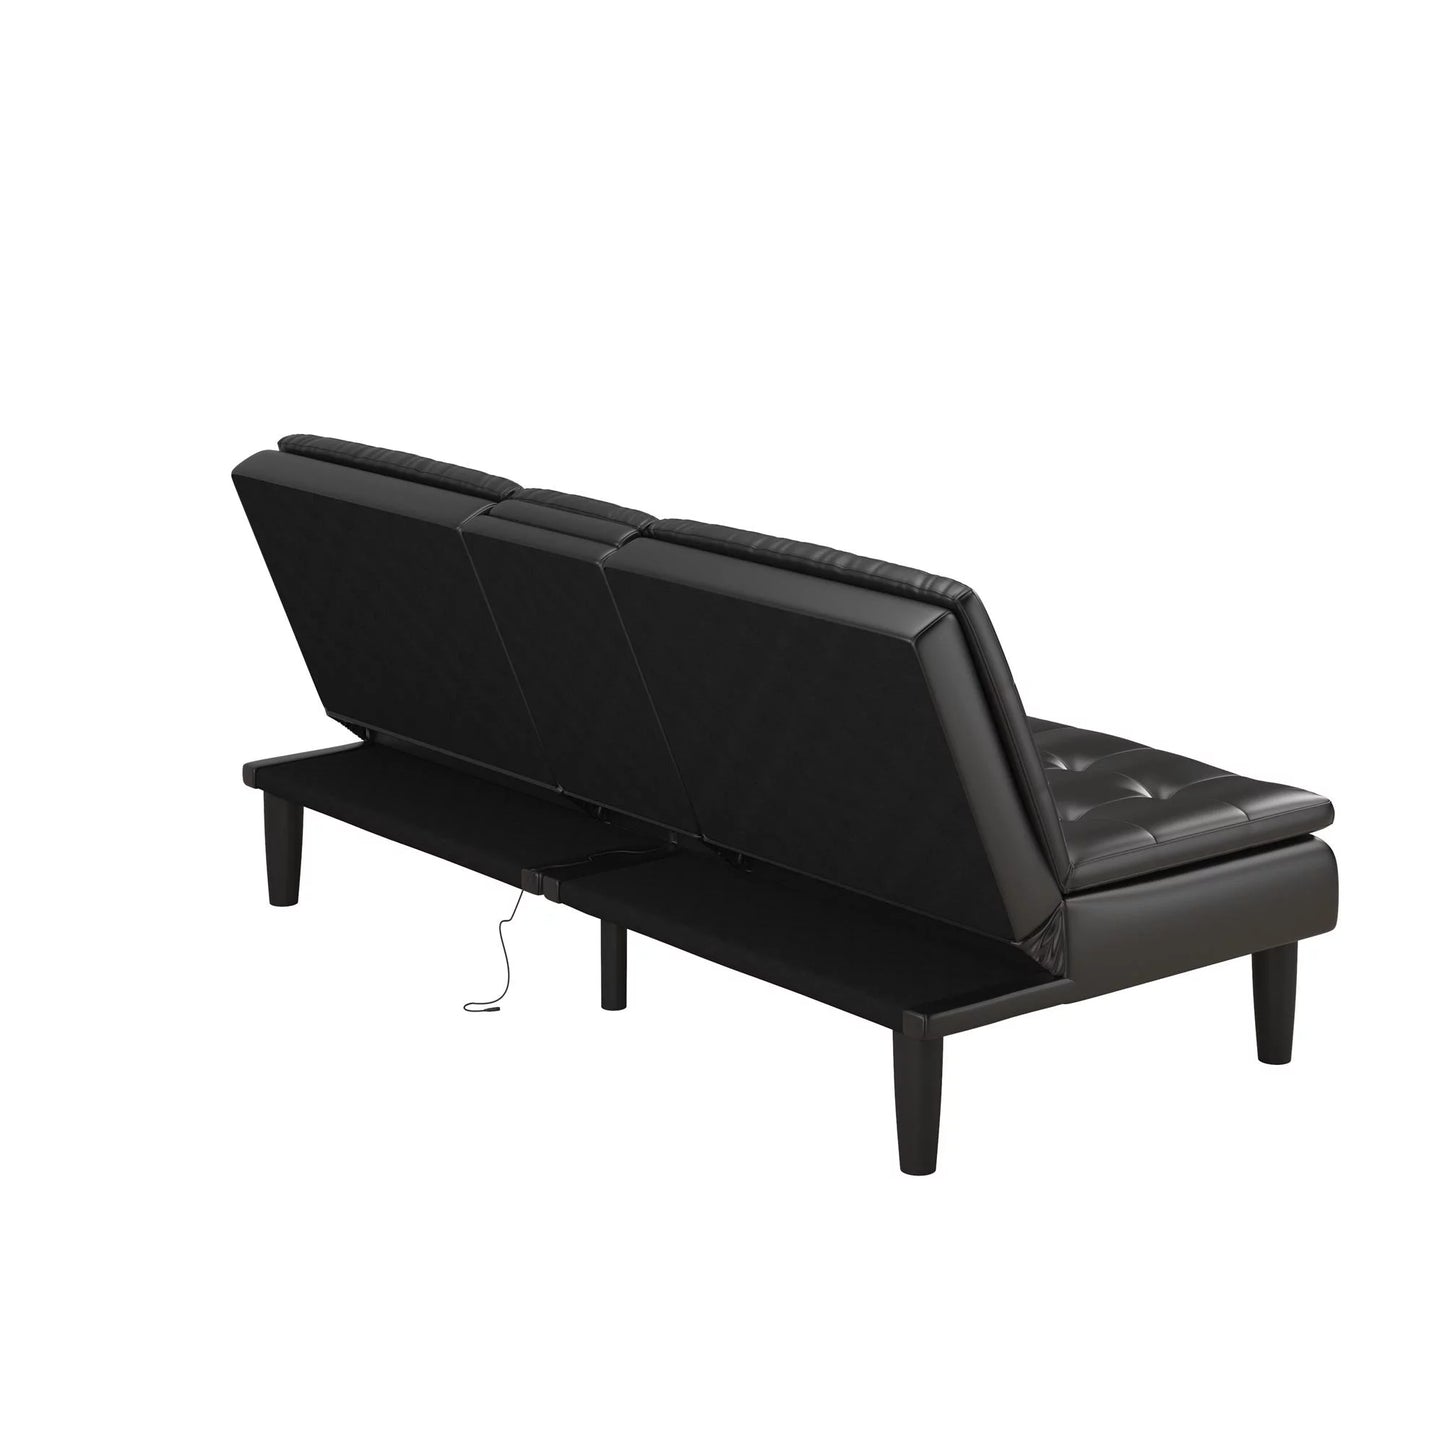 Memory Foam Futon with Cupholder and USB, Black Faux Leather - Design By Technique